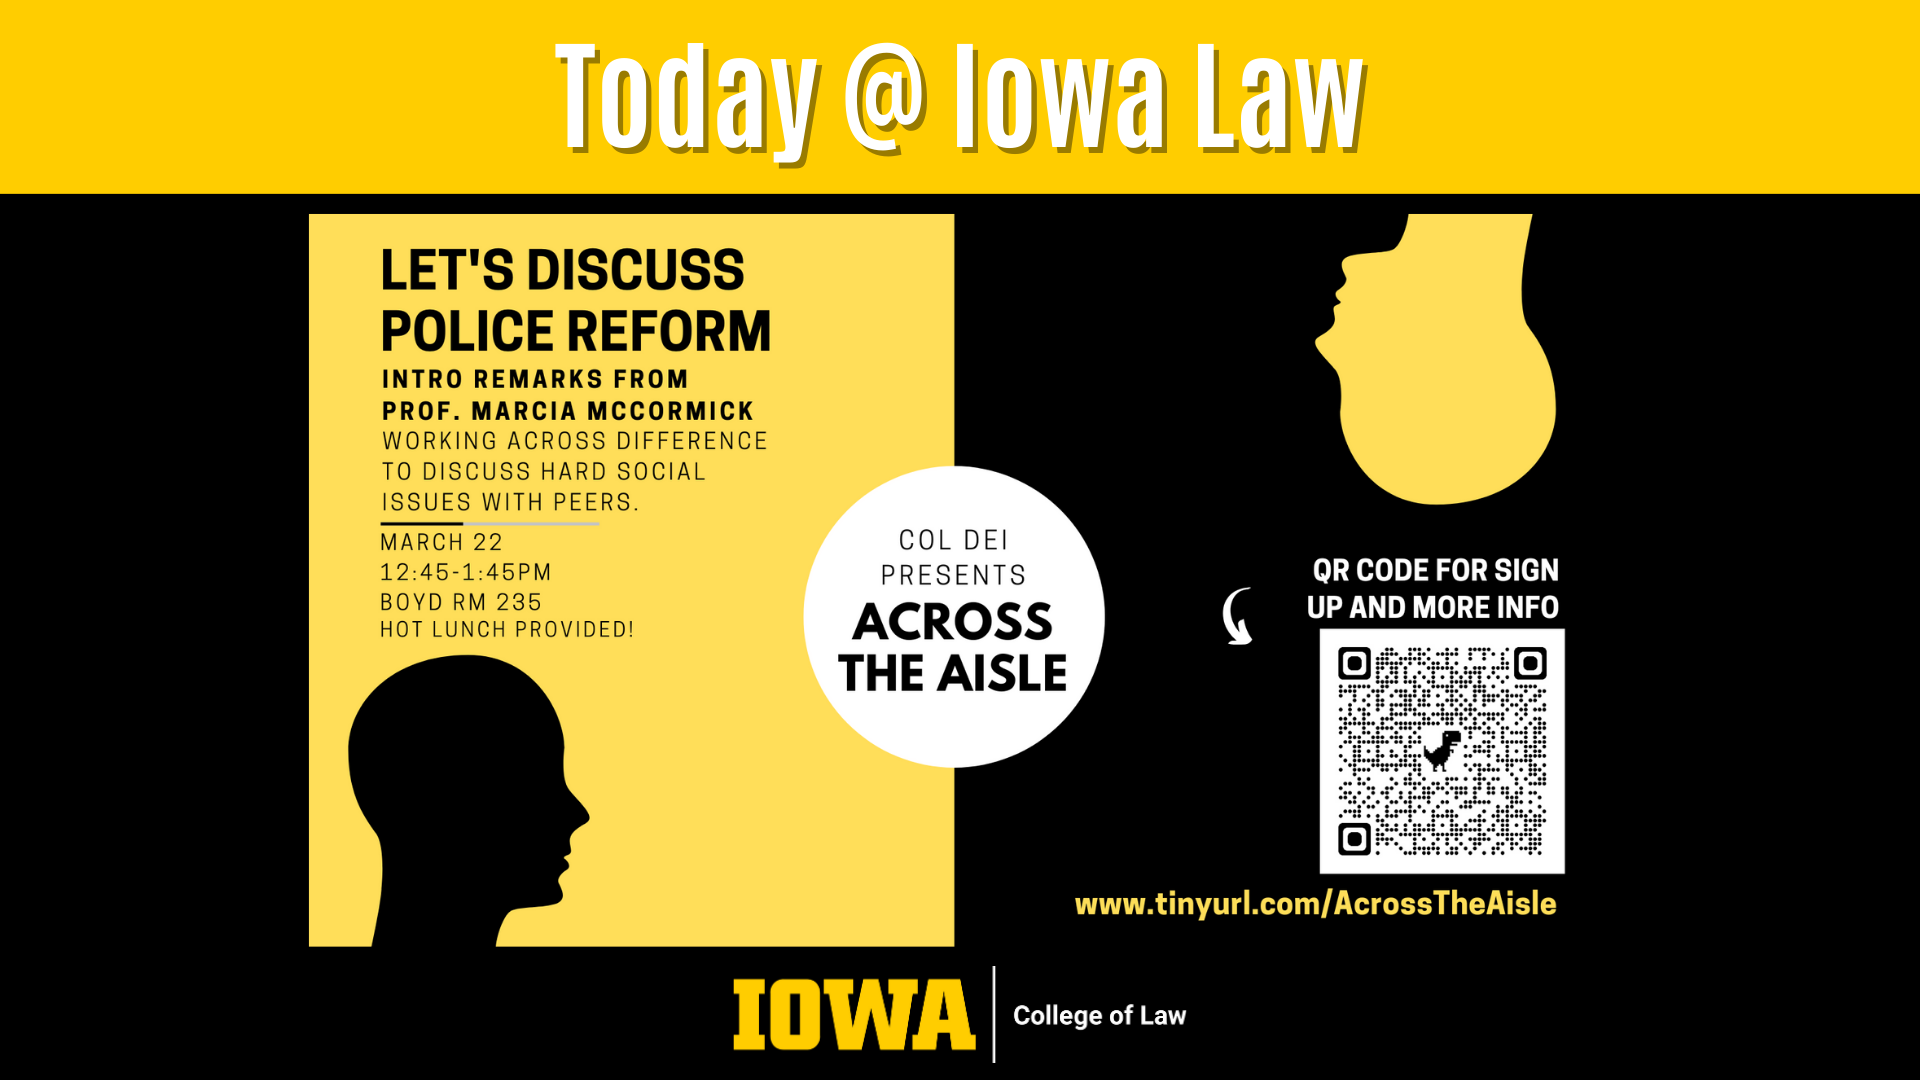 Across the Aisle. Let's discuss police reform. Intro remarks from Prof. Marcia McCormick. Working across difference to discuss hard social issues with peers. March 22. 12:45 - 1:45. Boyd Room 235. Hot lunch provided.